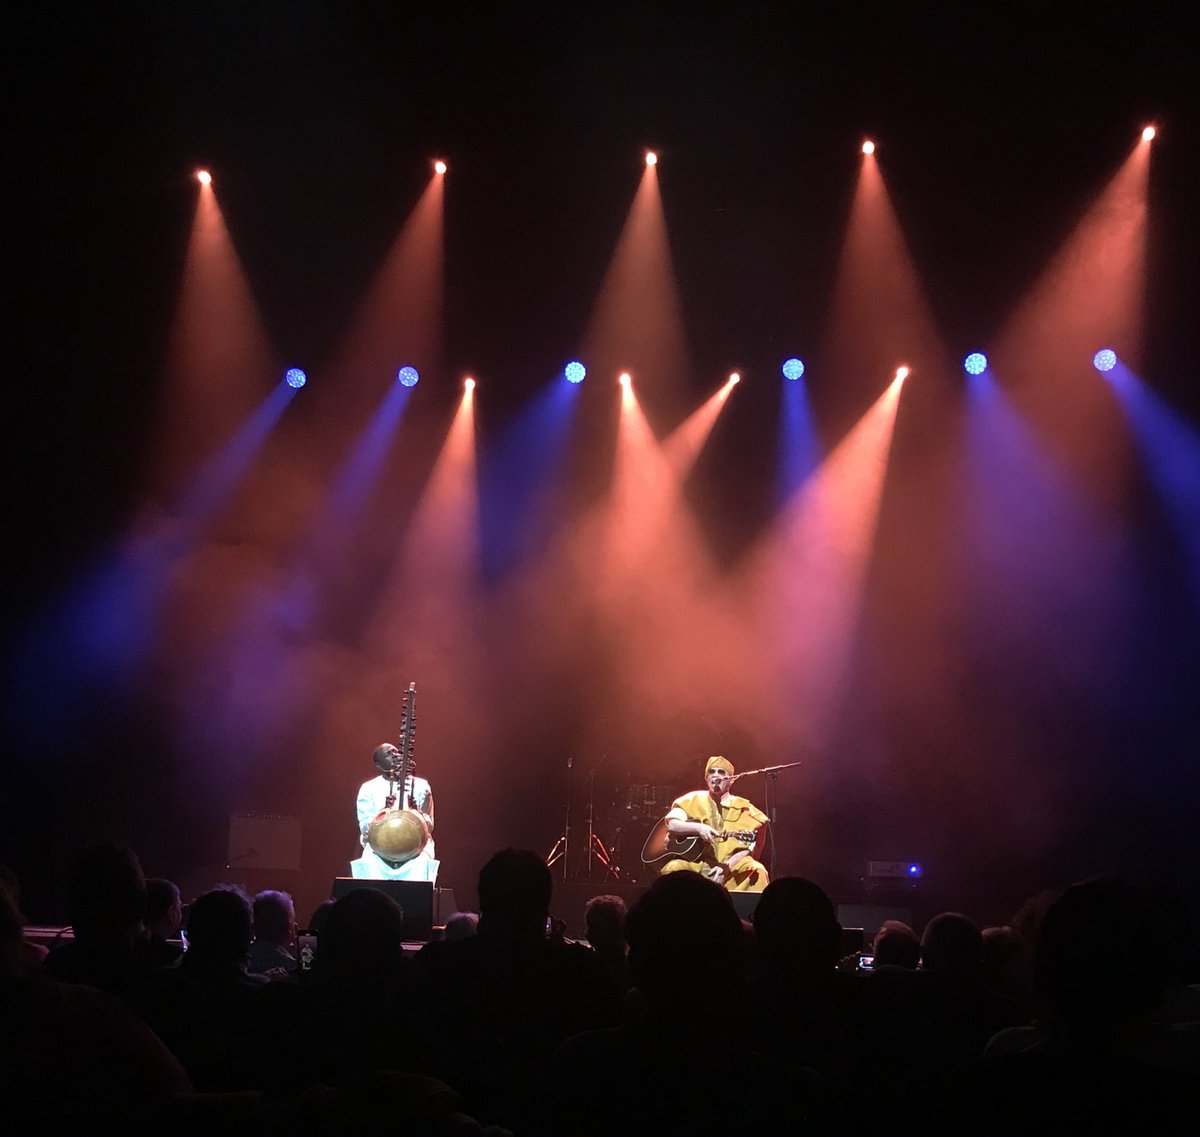 Congratulations to @SonglinesMag for their 25 years of supporting world music! What a fabulous concert at the @BarbicanCentre 2 weeks ago. @leventdunord, @Divanhana, @BalimayaProject & @SalifKeita.